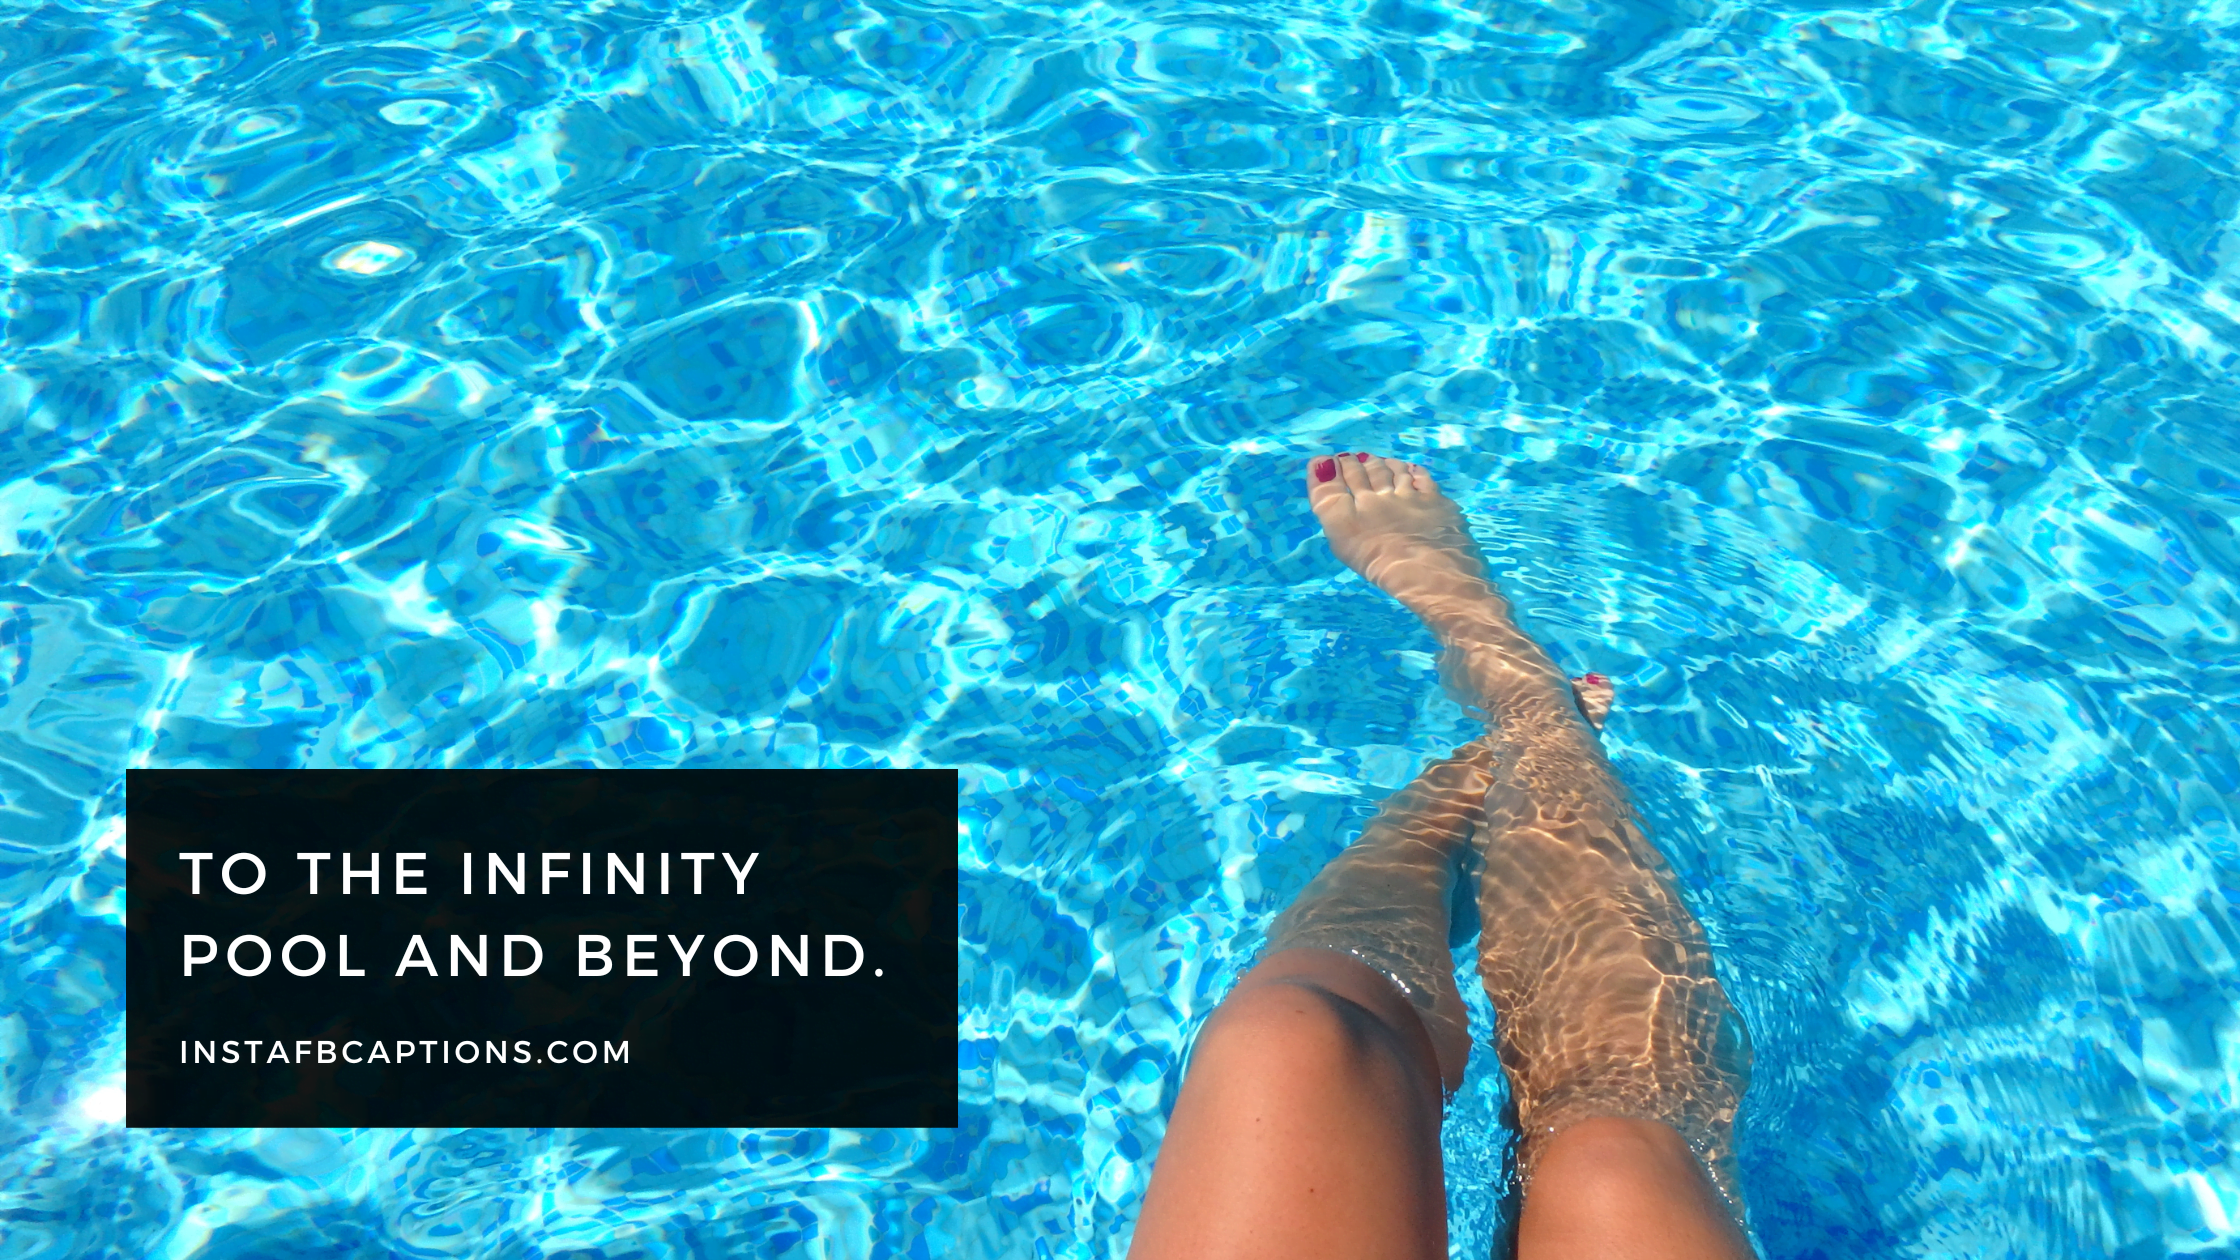 Infinity Pool Captions  - Infinity Pool Captions - 97 Pool Captions for Instagram in 2023